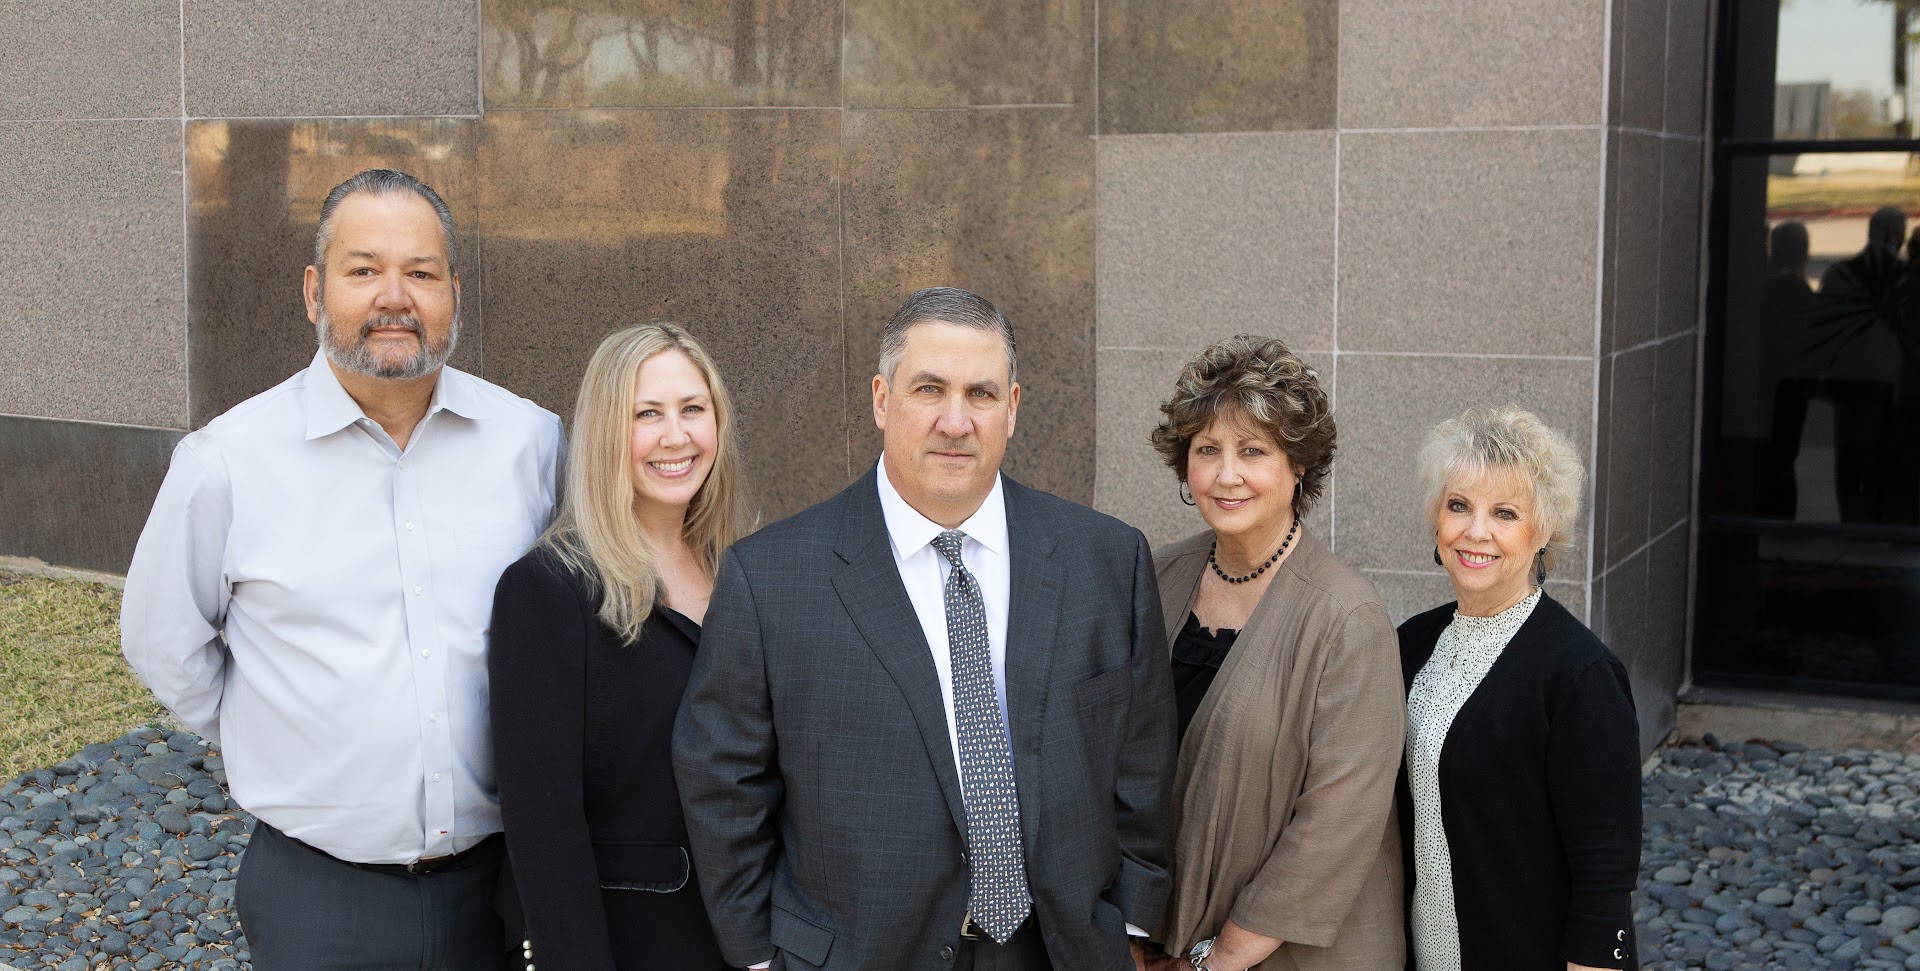 The Law Offices of Troy A. Brookover team, attorneys and staff